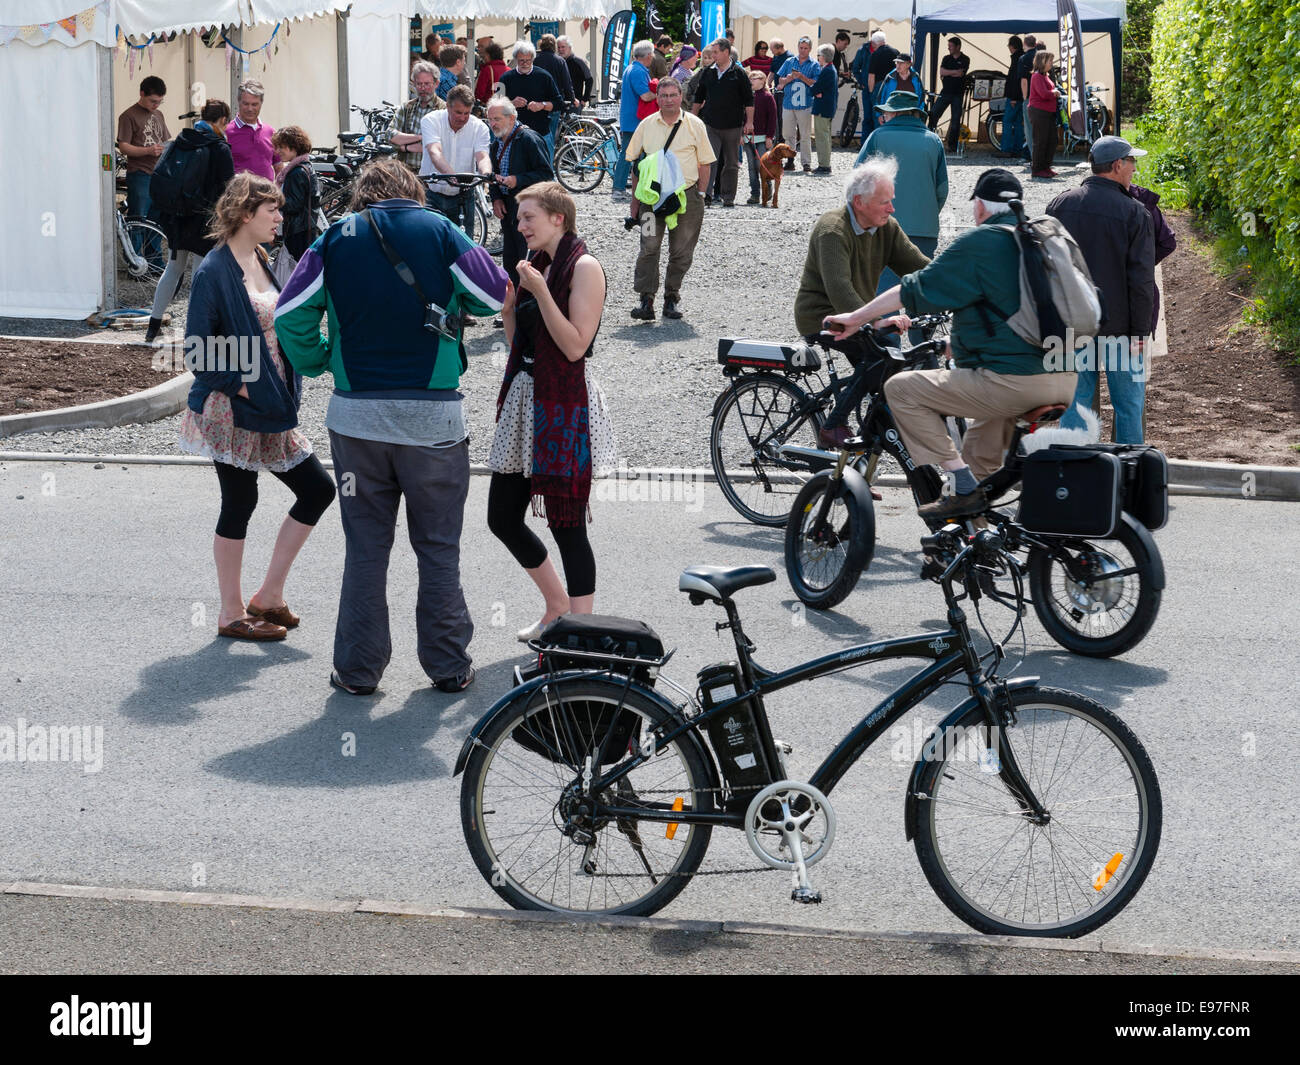 Presteigne, Powys, UK. Interested visitors trying out electric bikes at a trade show Stock Photo